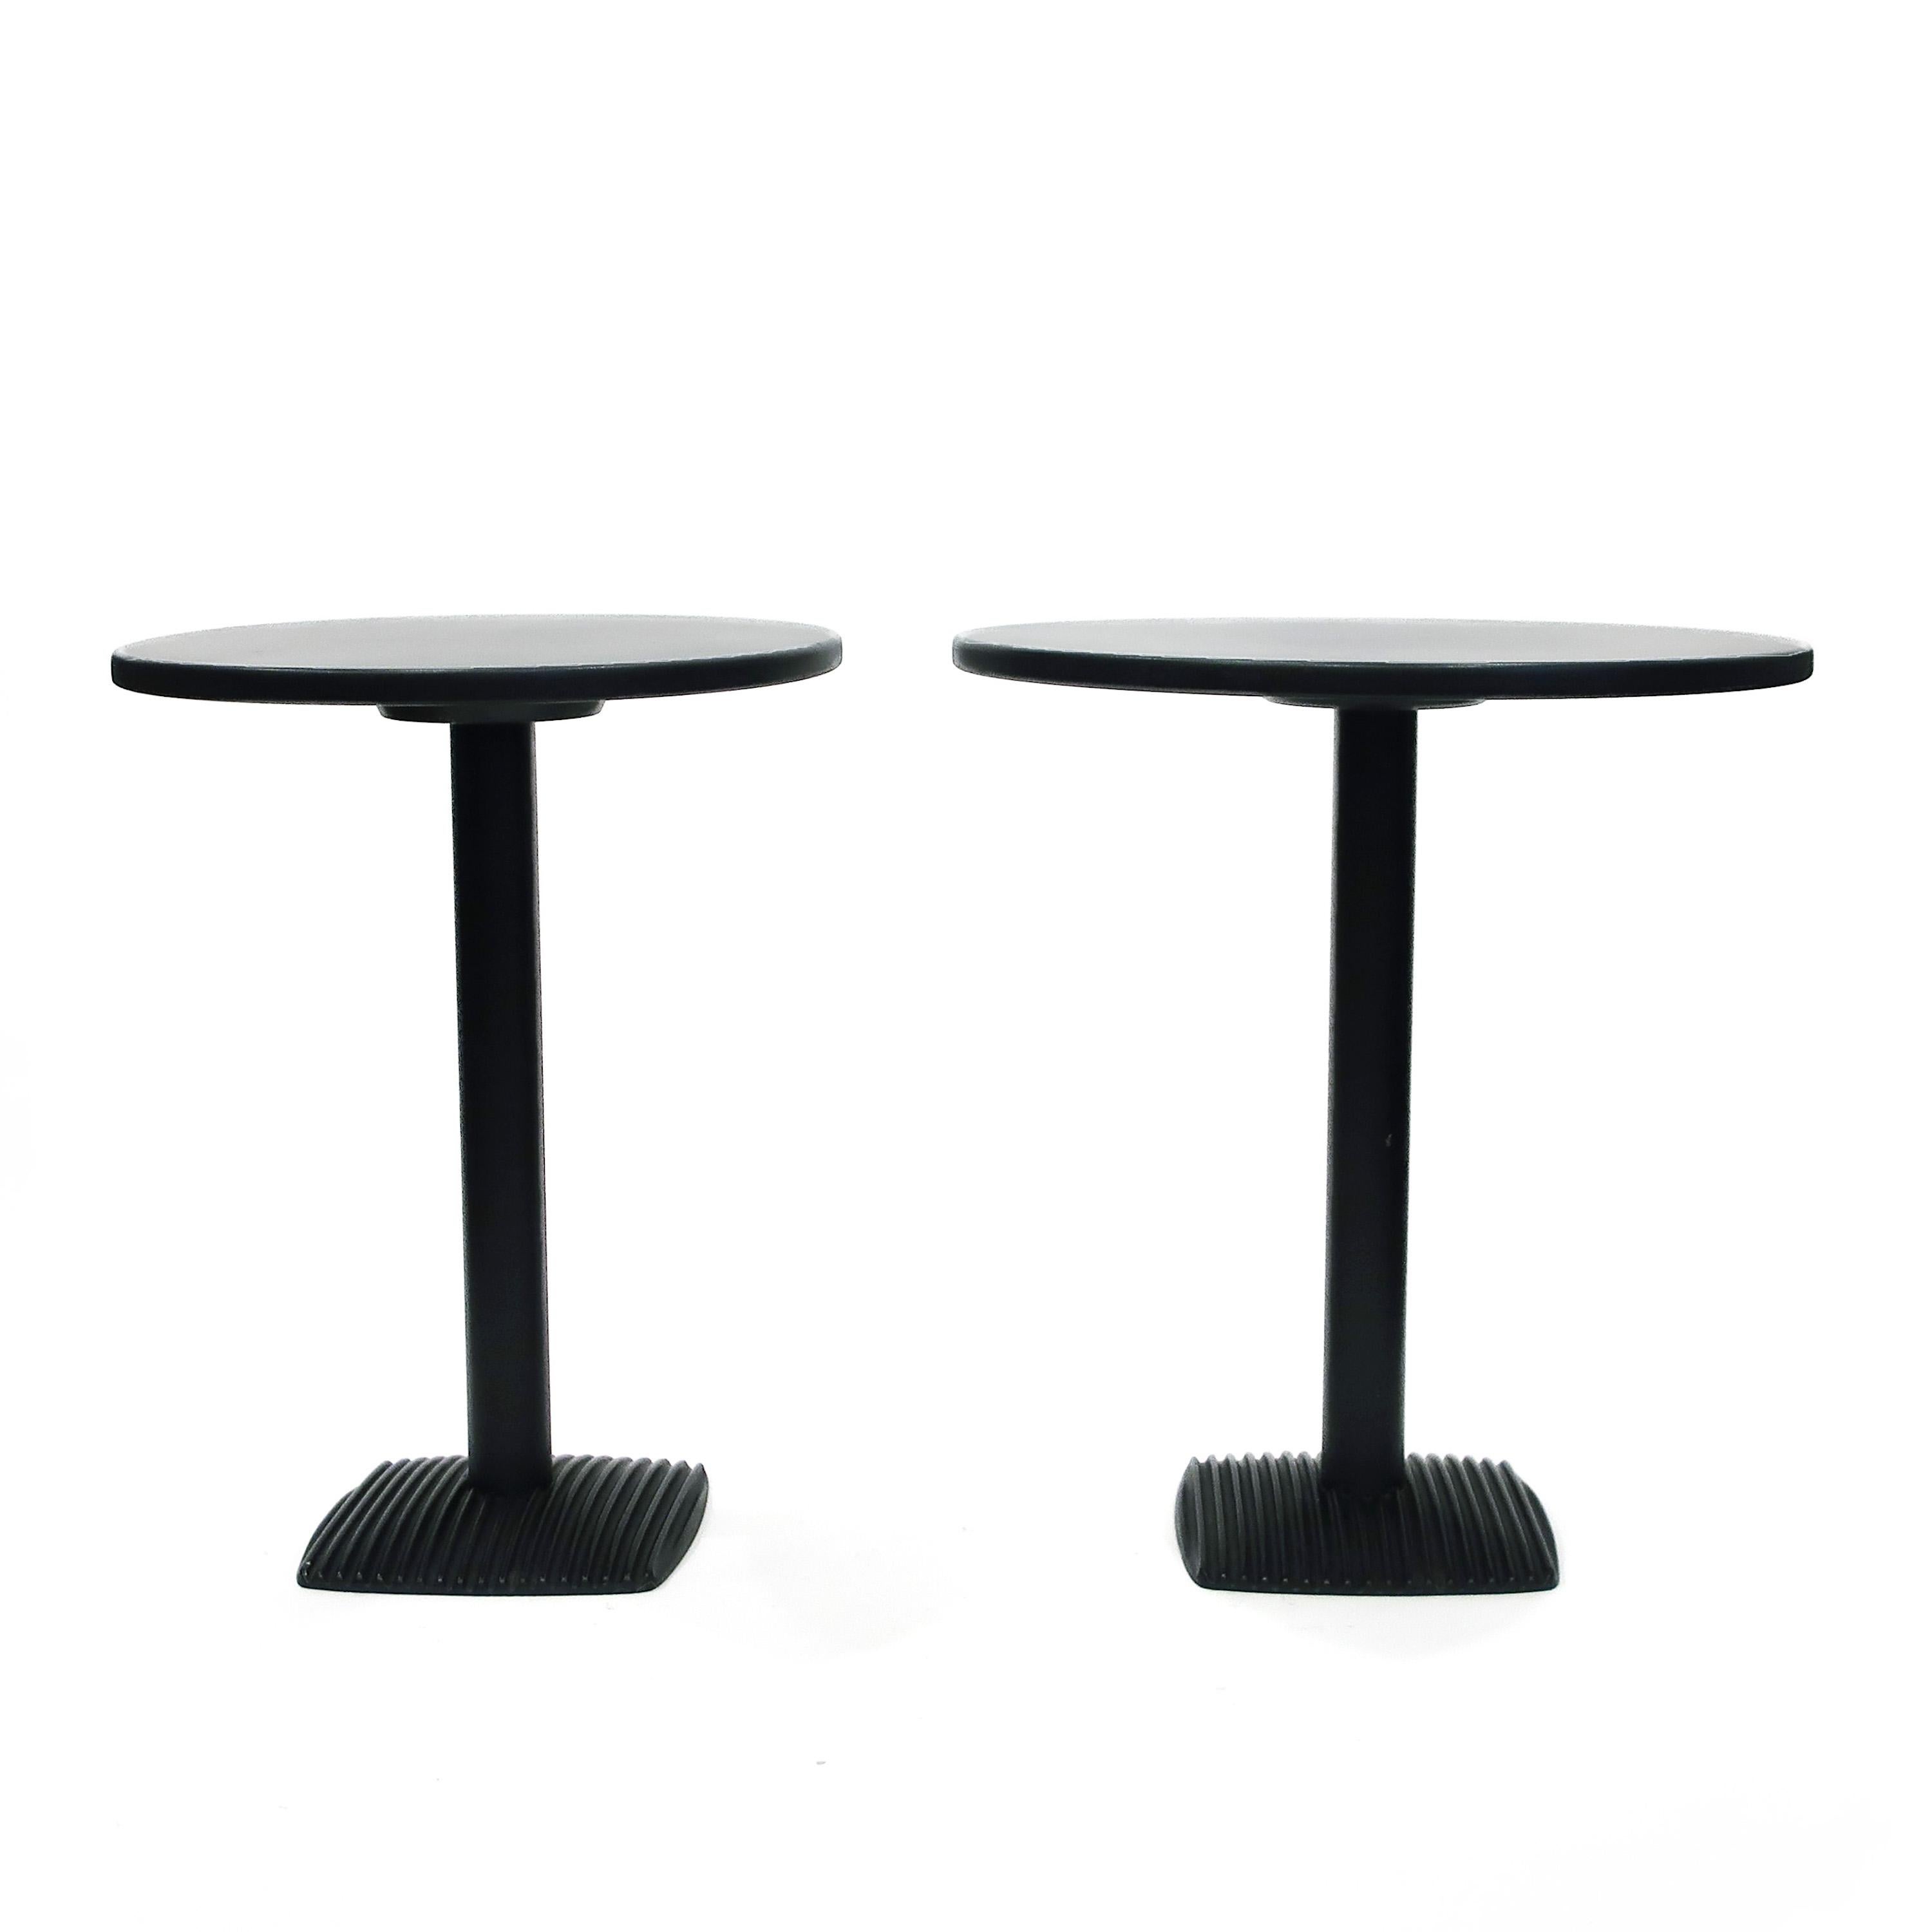 A pair of simply designed side or drinks tables with a black painted iron base and black laminate over wood tops. Bases are matching while one top is round and one is oval. Functional and beautiful in their Minimalism. Likely Italian from the